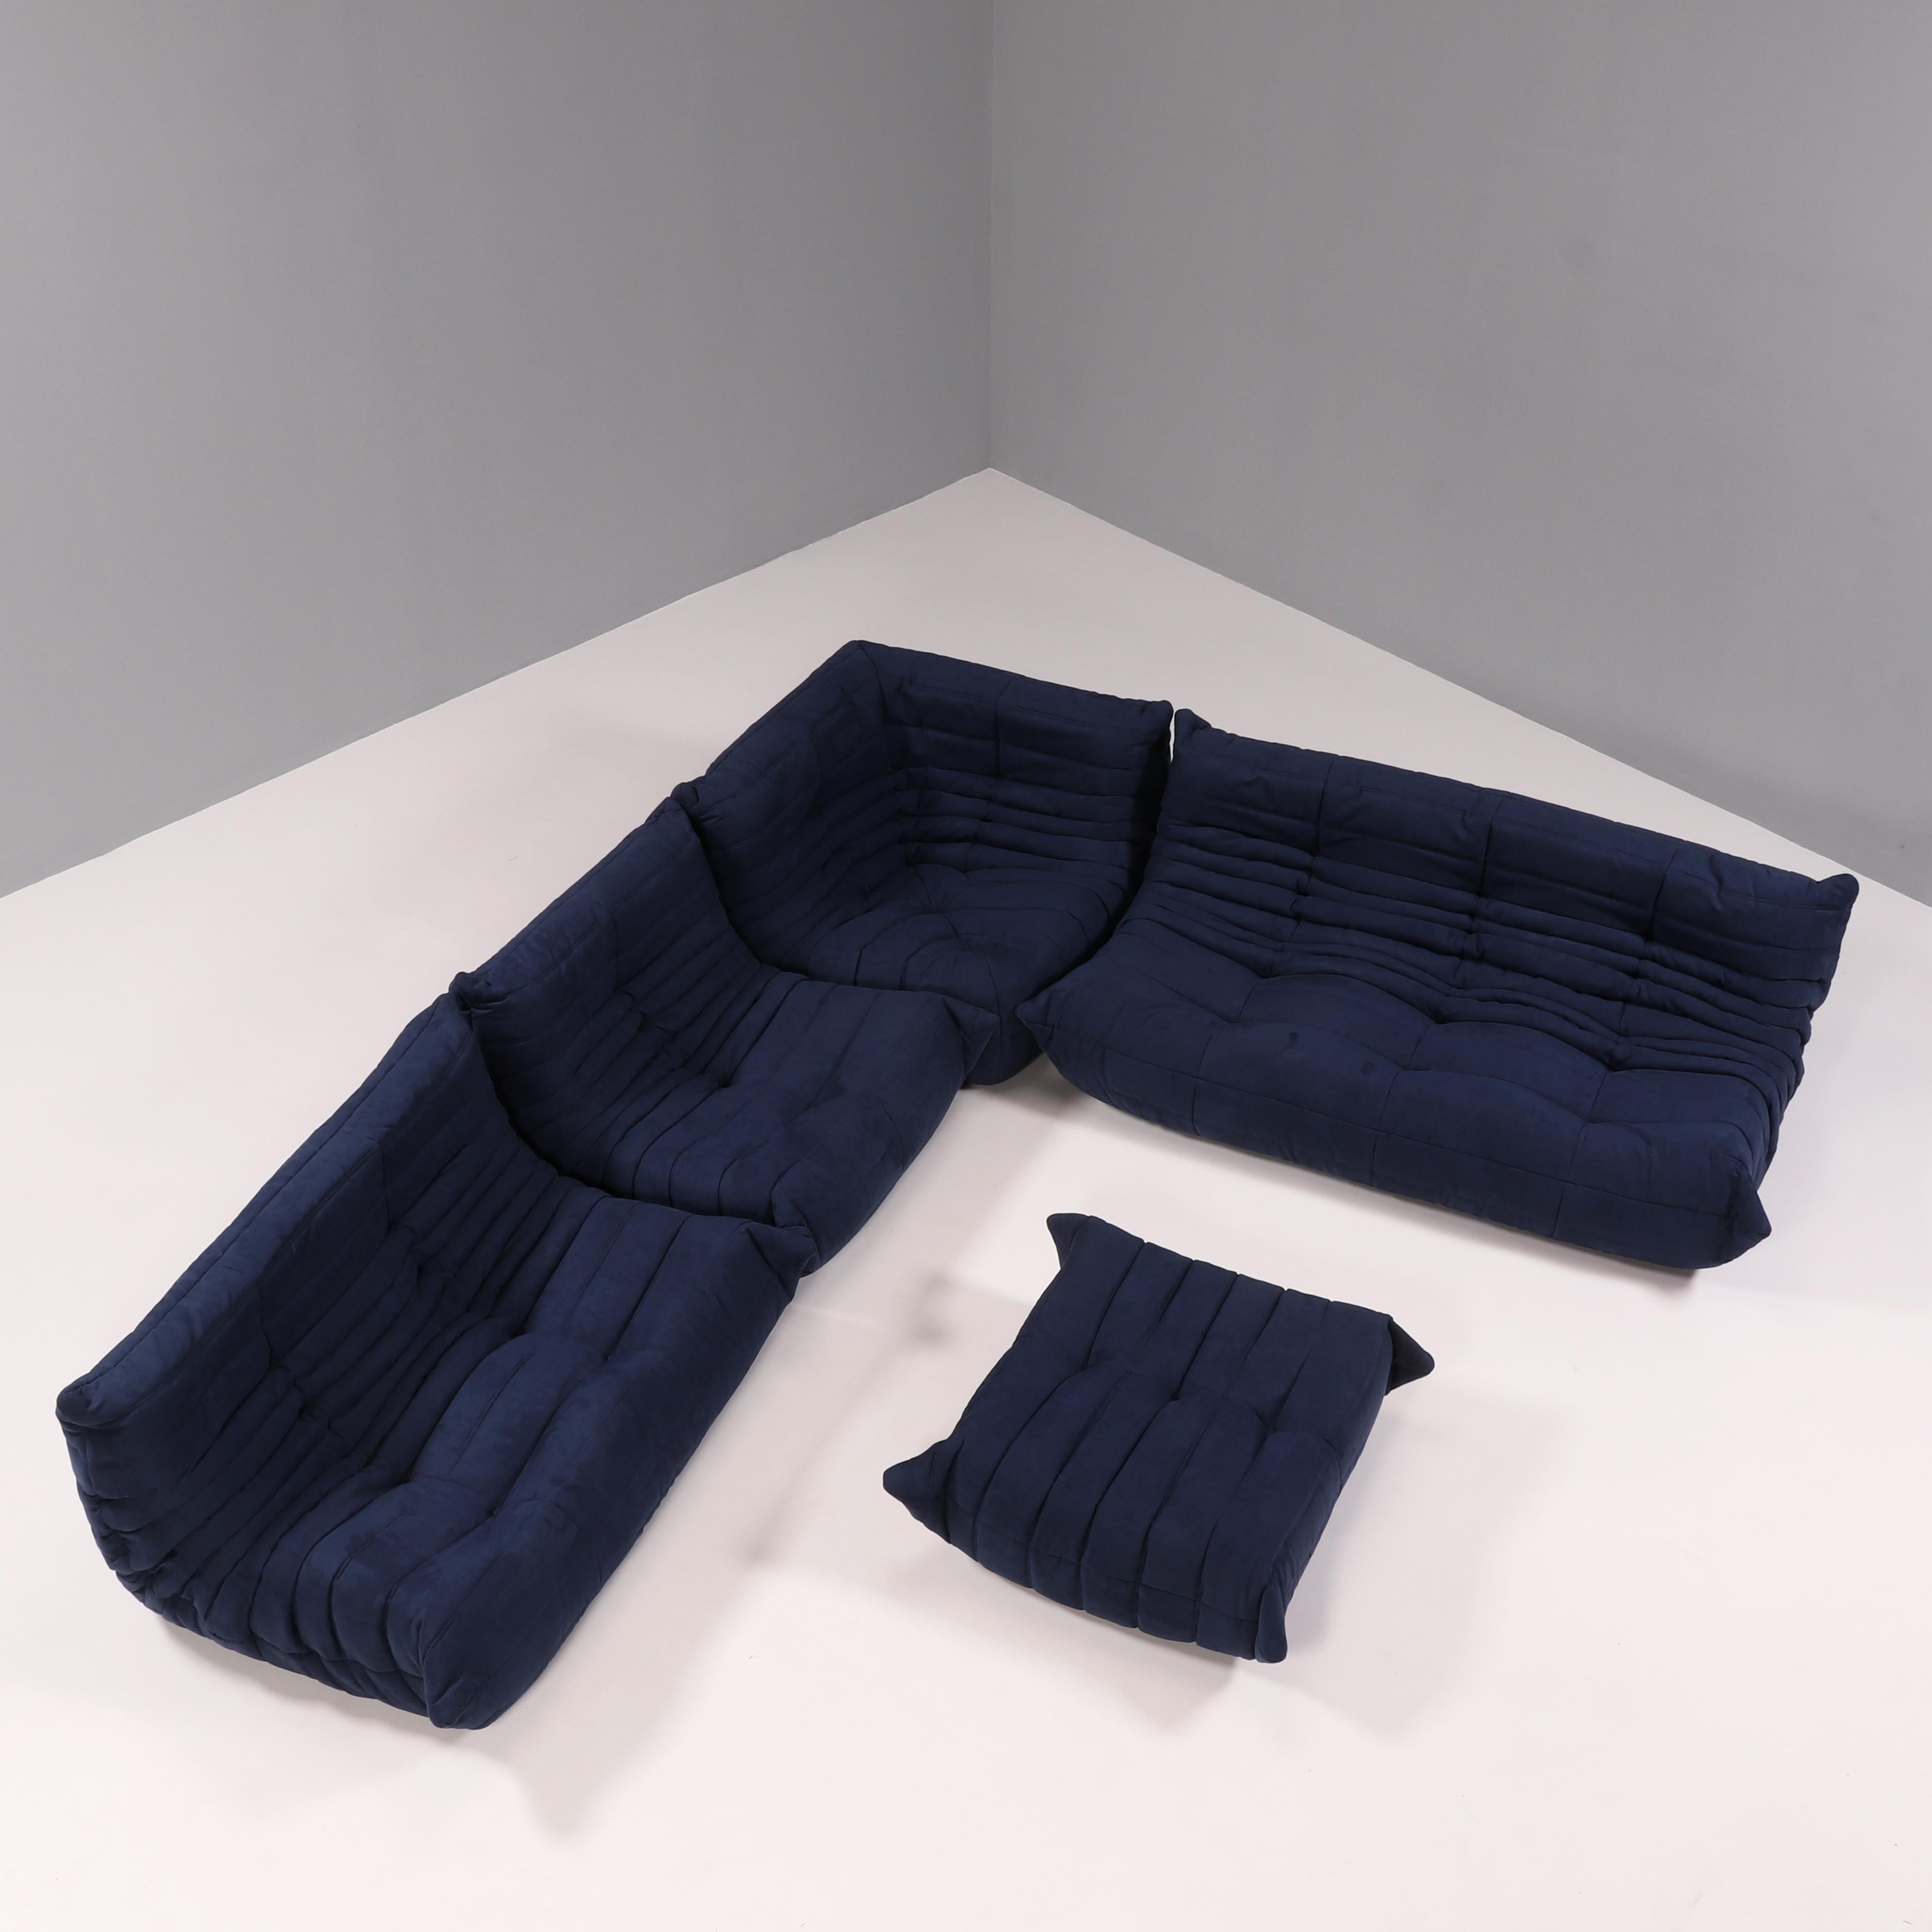 The iconic Togo blue sofa set, originally designed by Michel Ducaroy for Ligne Roset in 1973, has become a design Mid Century Classic.

The sofas have been newly reupholstered in a soft dark blue fabric. Made completely from foam, with three